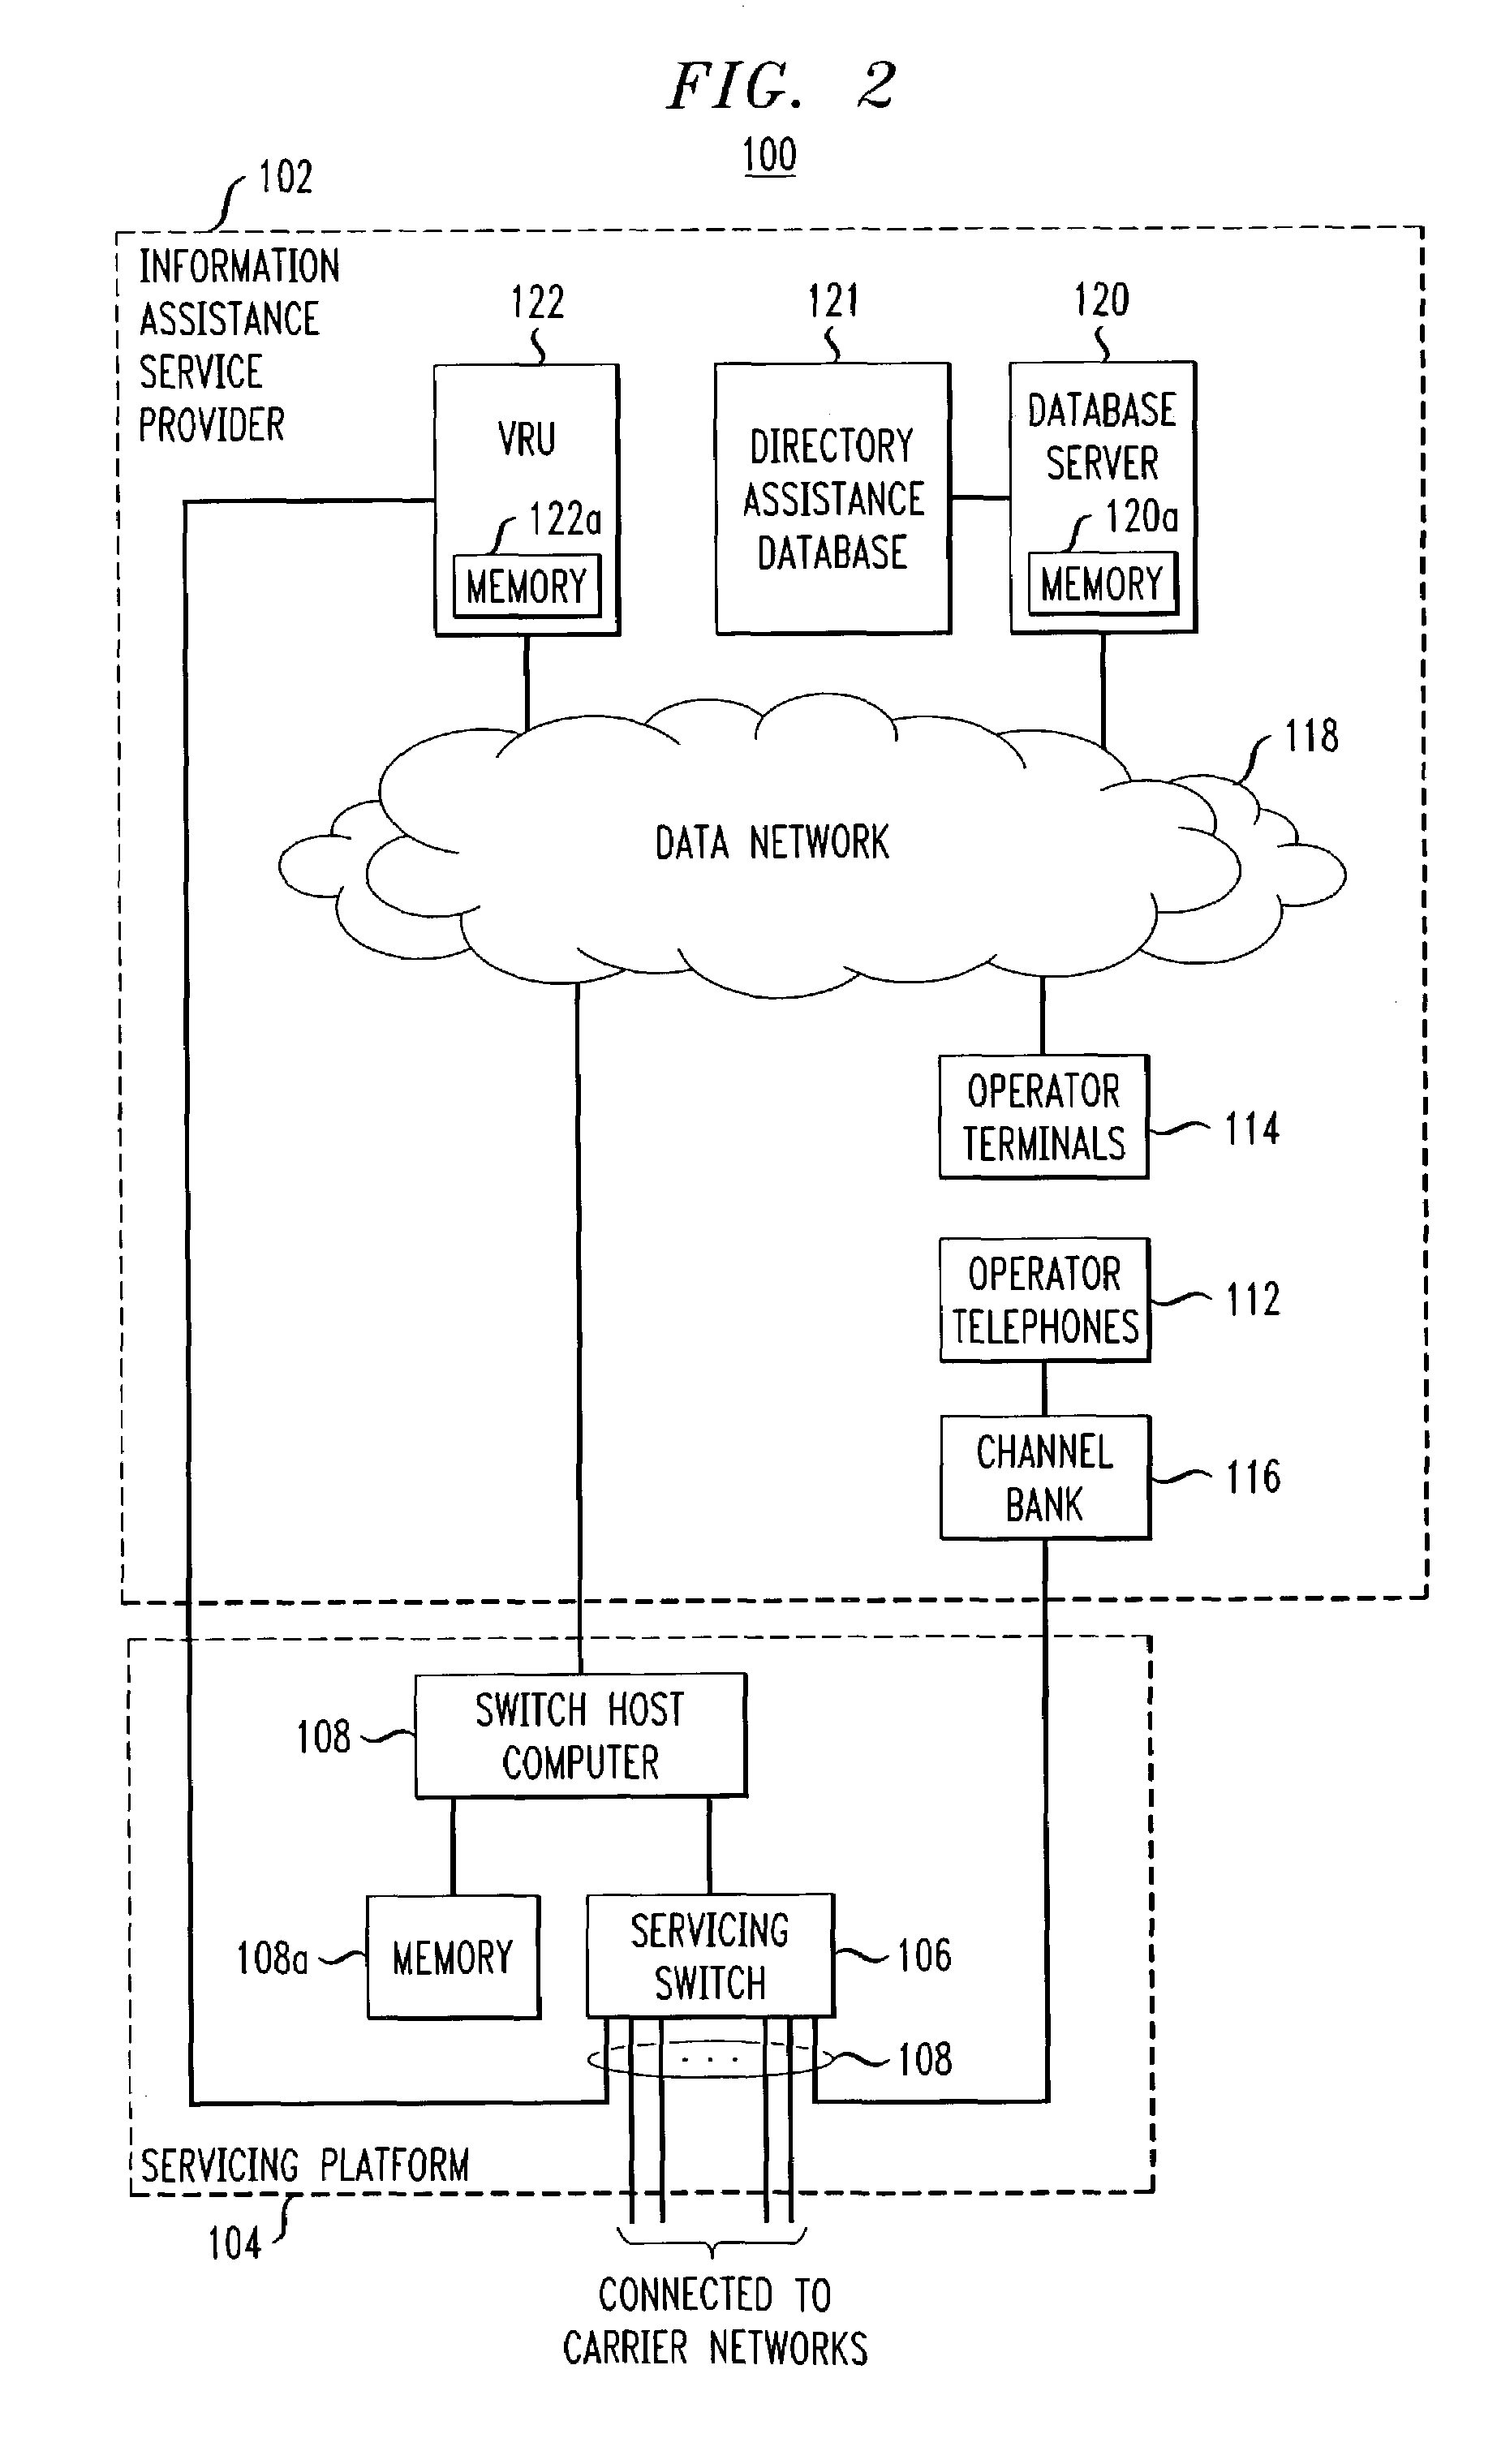 System and method for identifying parties in bills for communications services